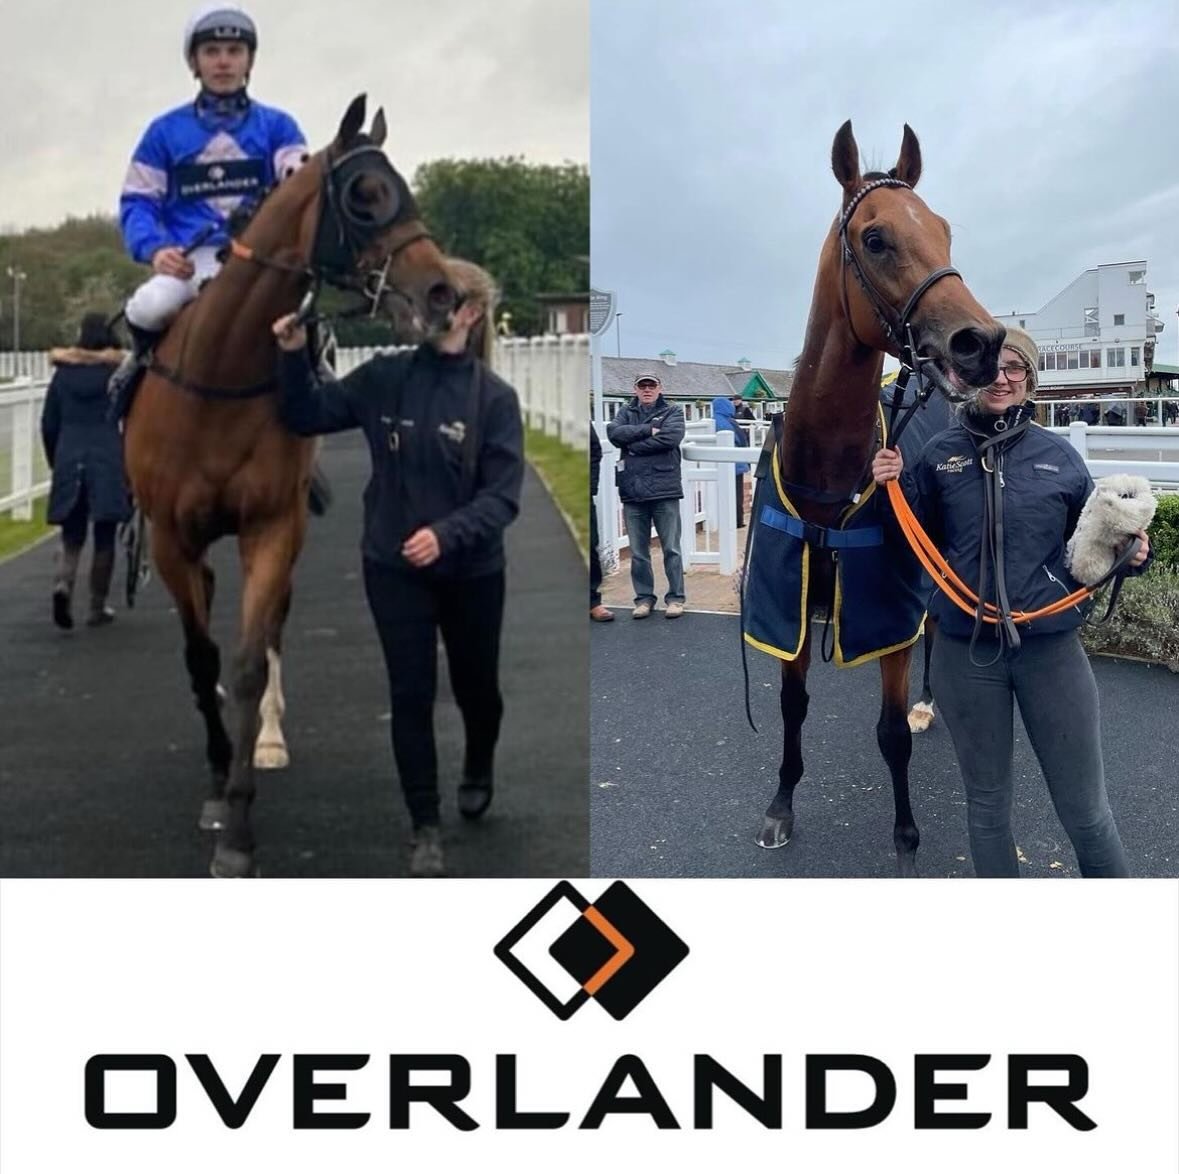 A trip to @wolvesraces 

2.05 Rockley Point lines up for The Vintage Flyers under Phil Dennis

5.20 Jackmeister Rudi lines up for The Katie Scott Racing Syndicate under Phil Dennis 

Good Luck Everyone
🍀🍀🍀

@overlandervehicles 🚛🚚